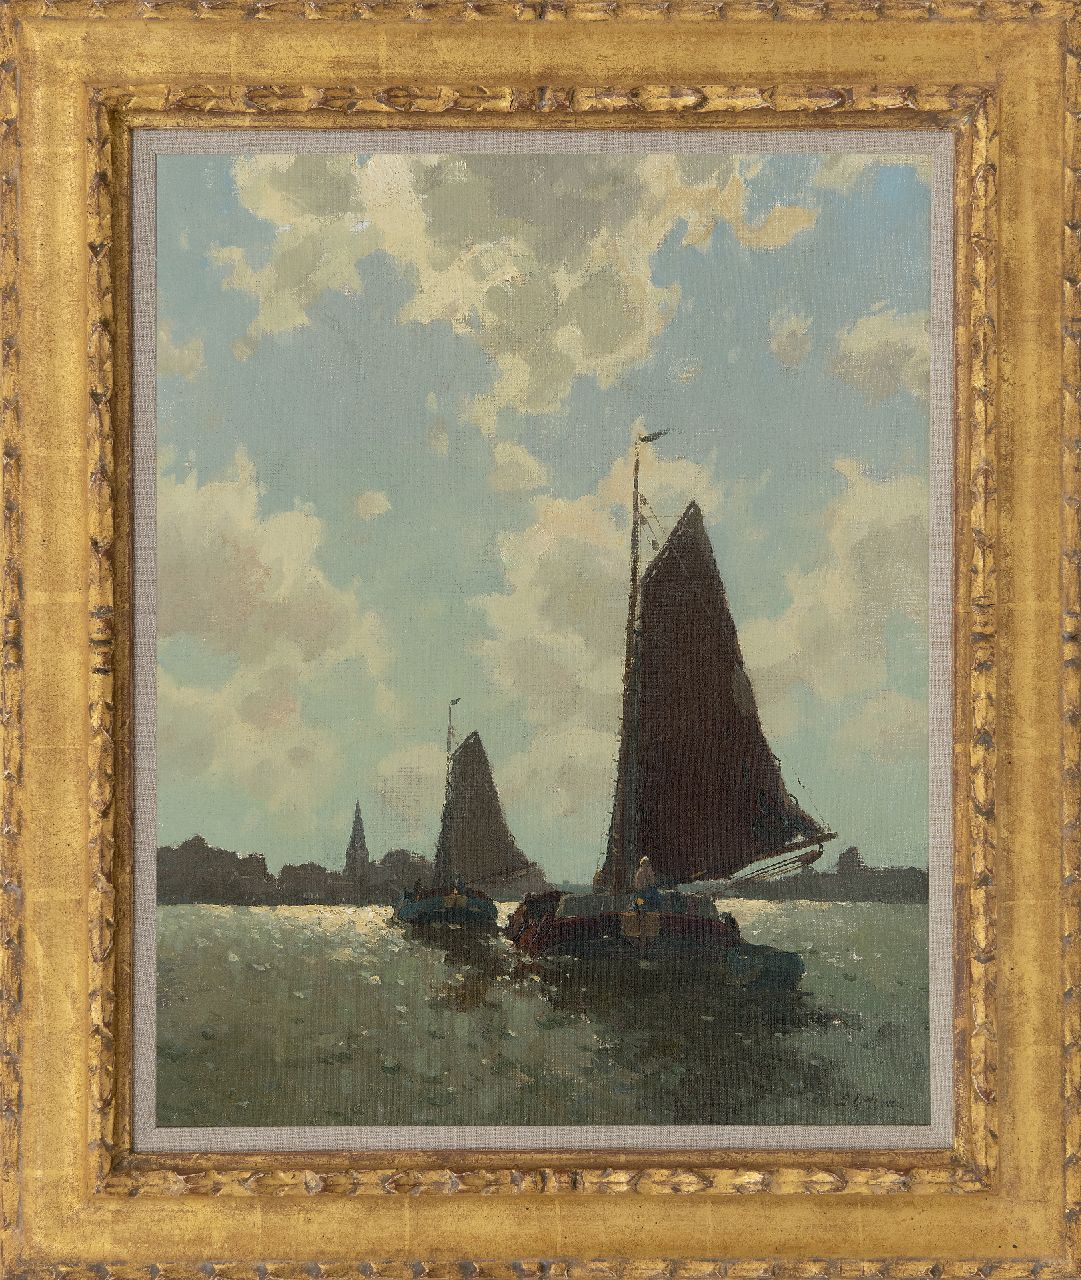 Ydema E.  | Egnatius Ydema, Two barges in backlight near Eernewoude, oil on canvas 50.5 x 40.3 cm, signed l.r.